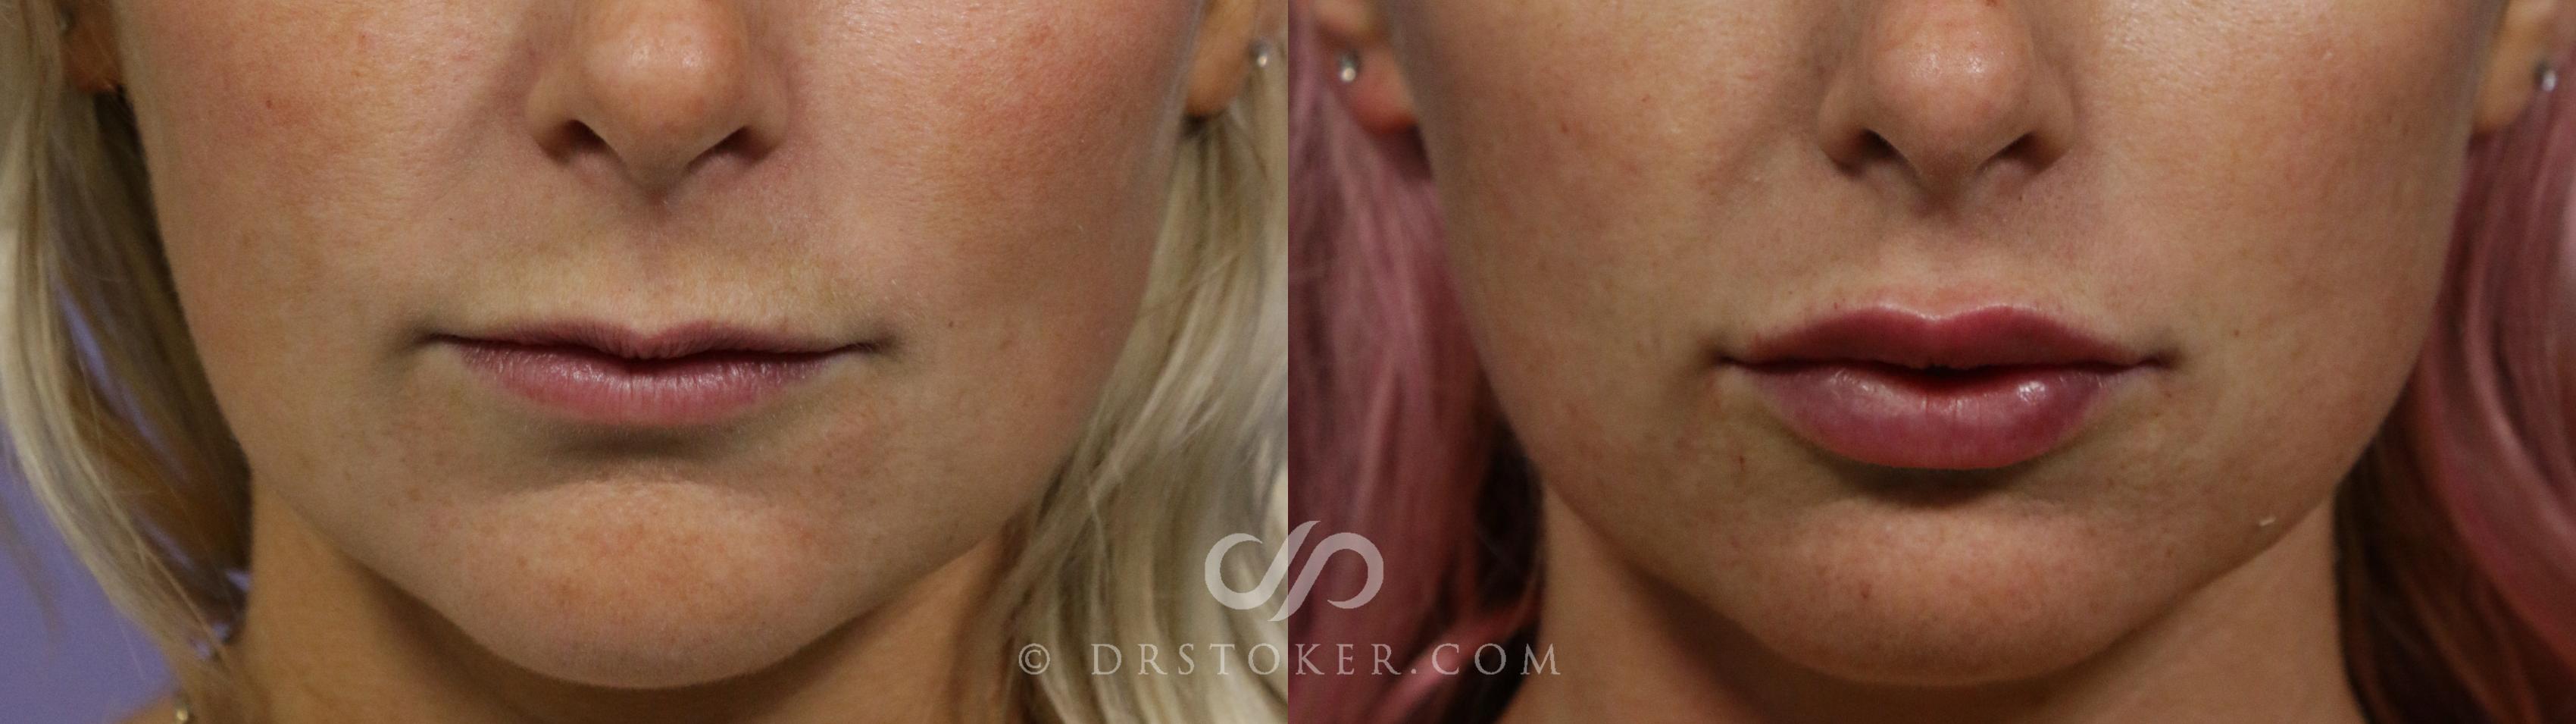 Before & After Lip Fillers/Augmentation Case 1855 Front View in Los Angeles, CA